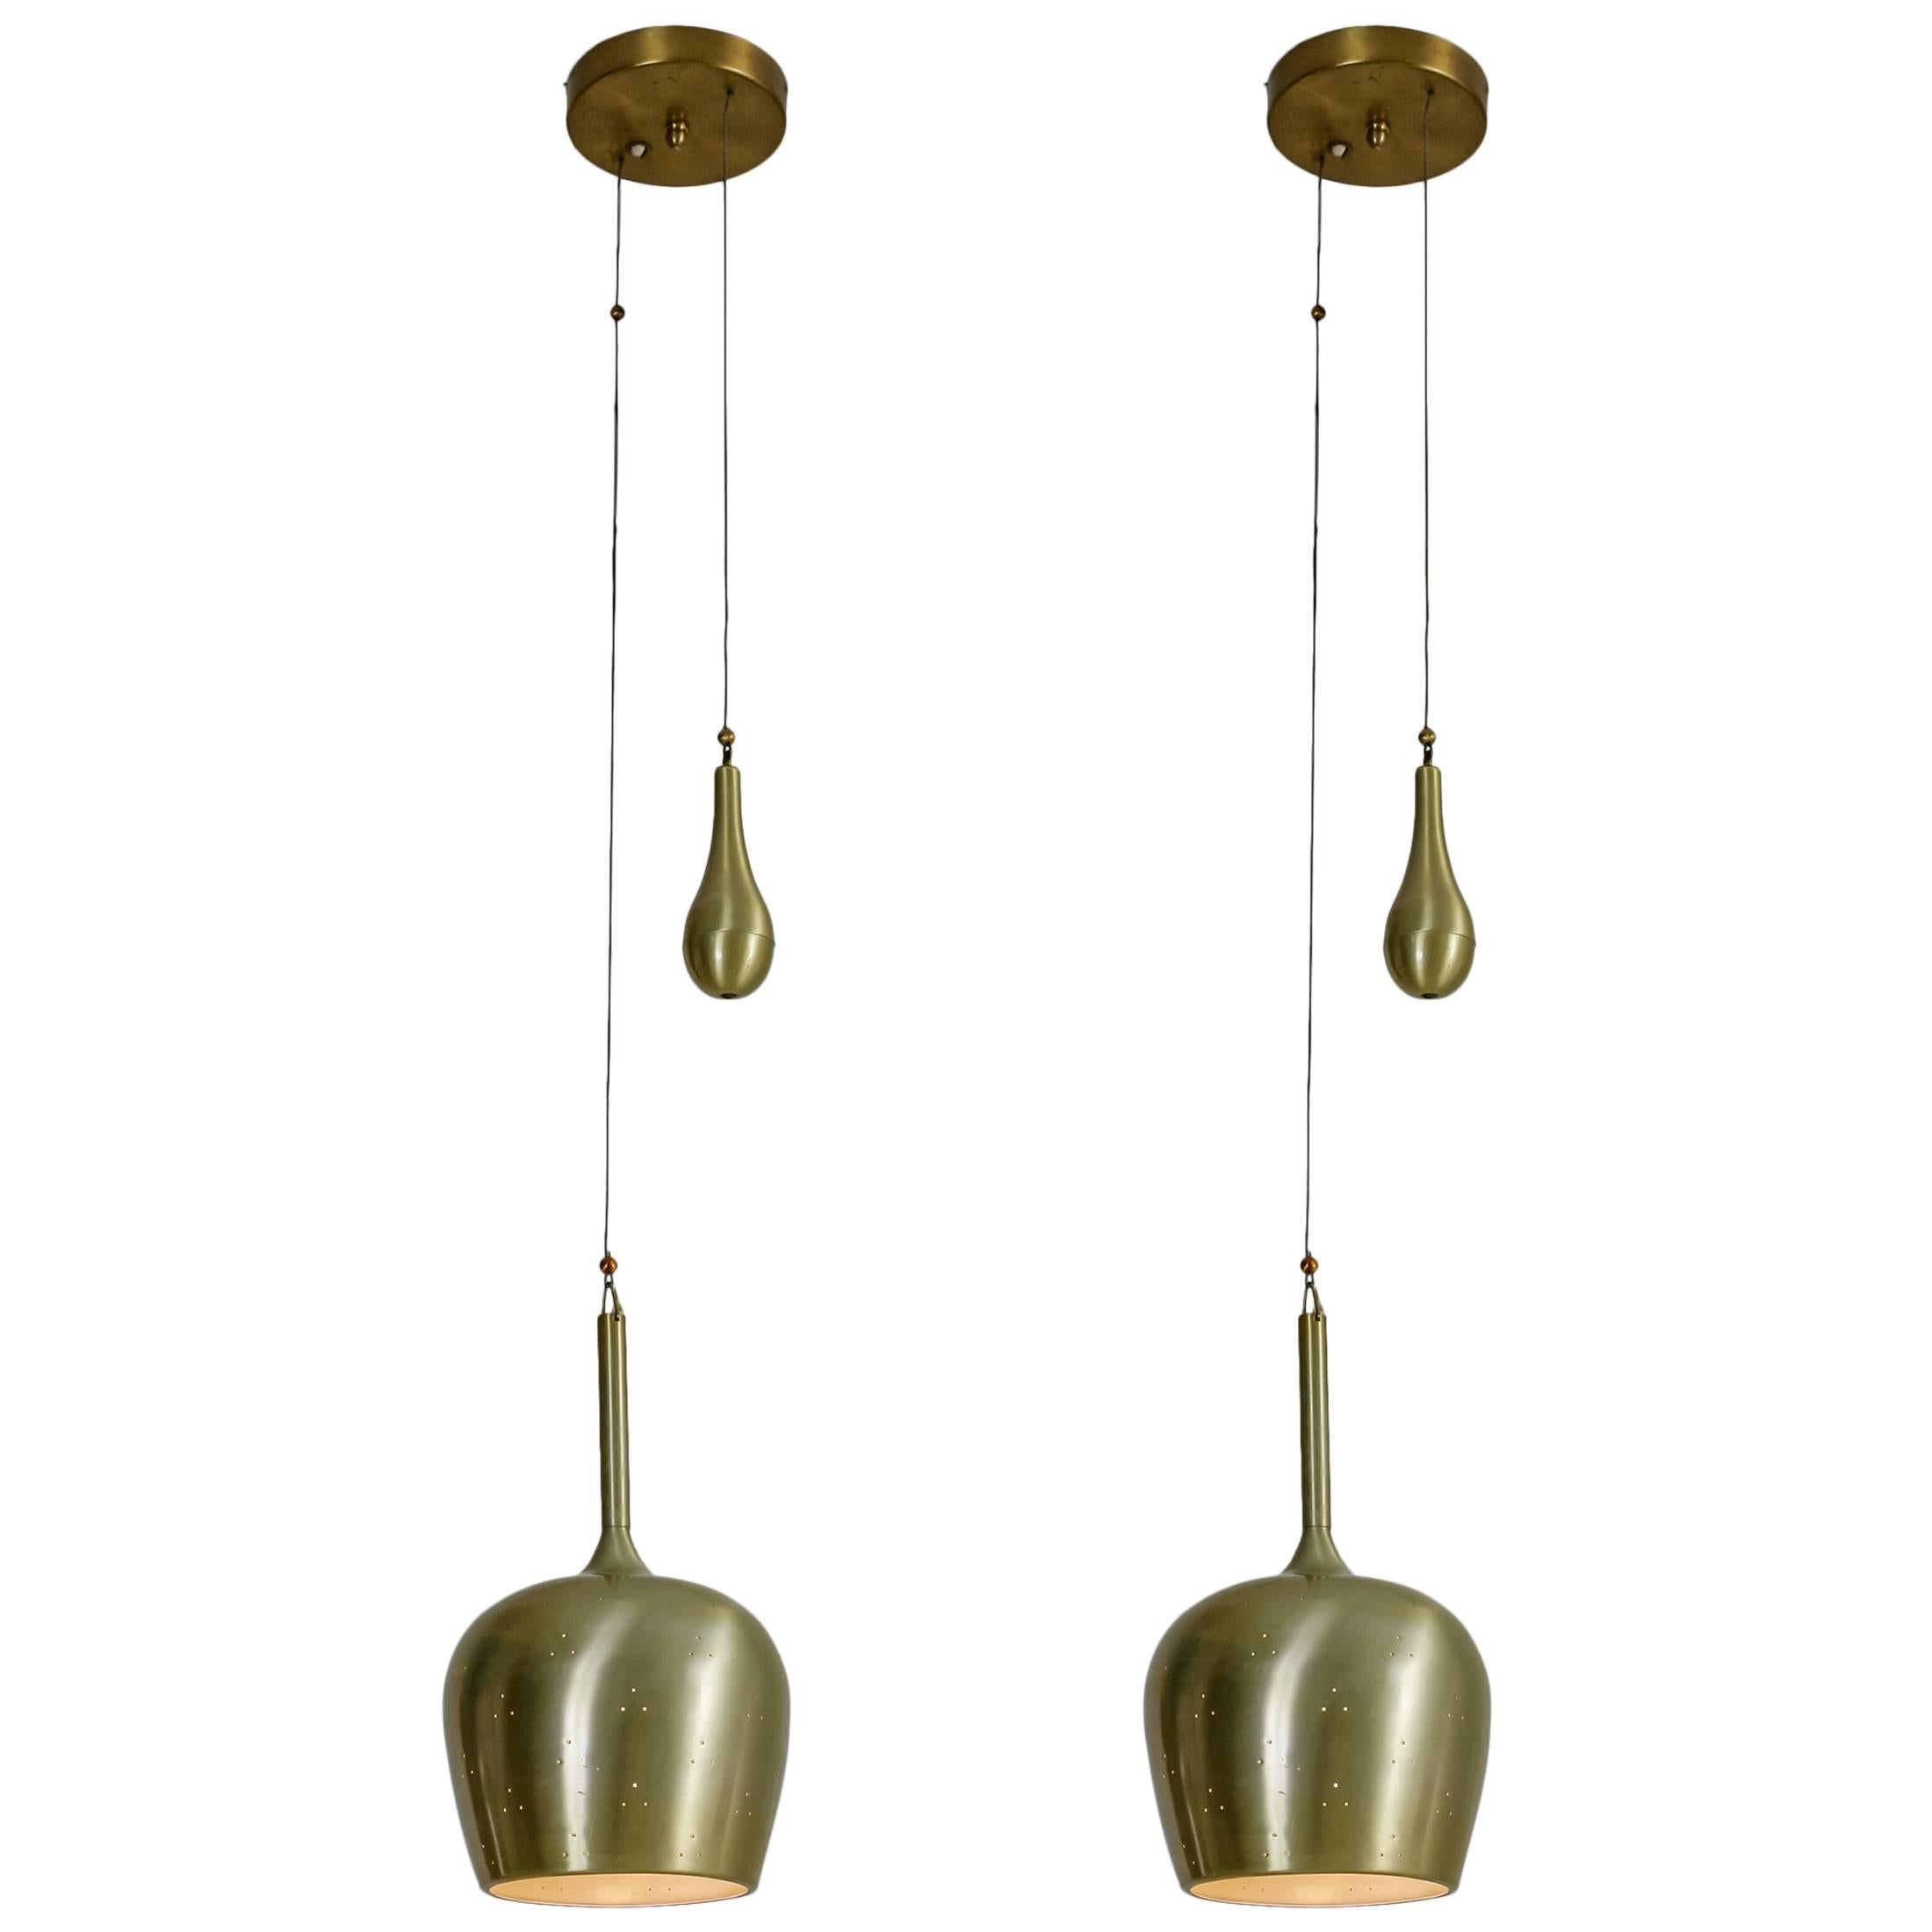 Pair Paavo Tynell Brass Brandy Snifter Shaped Pendant Lamps, Finland, 1950s For Sale